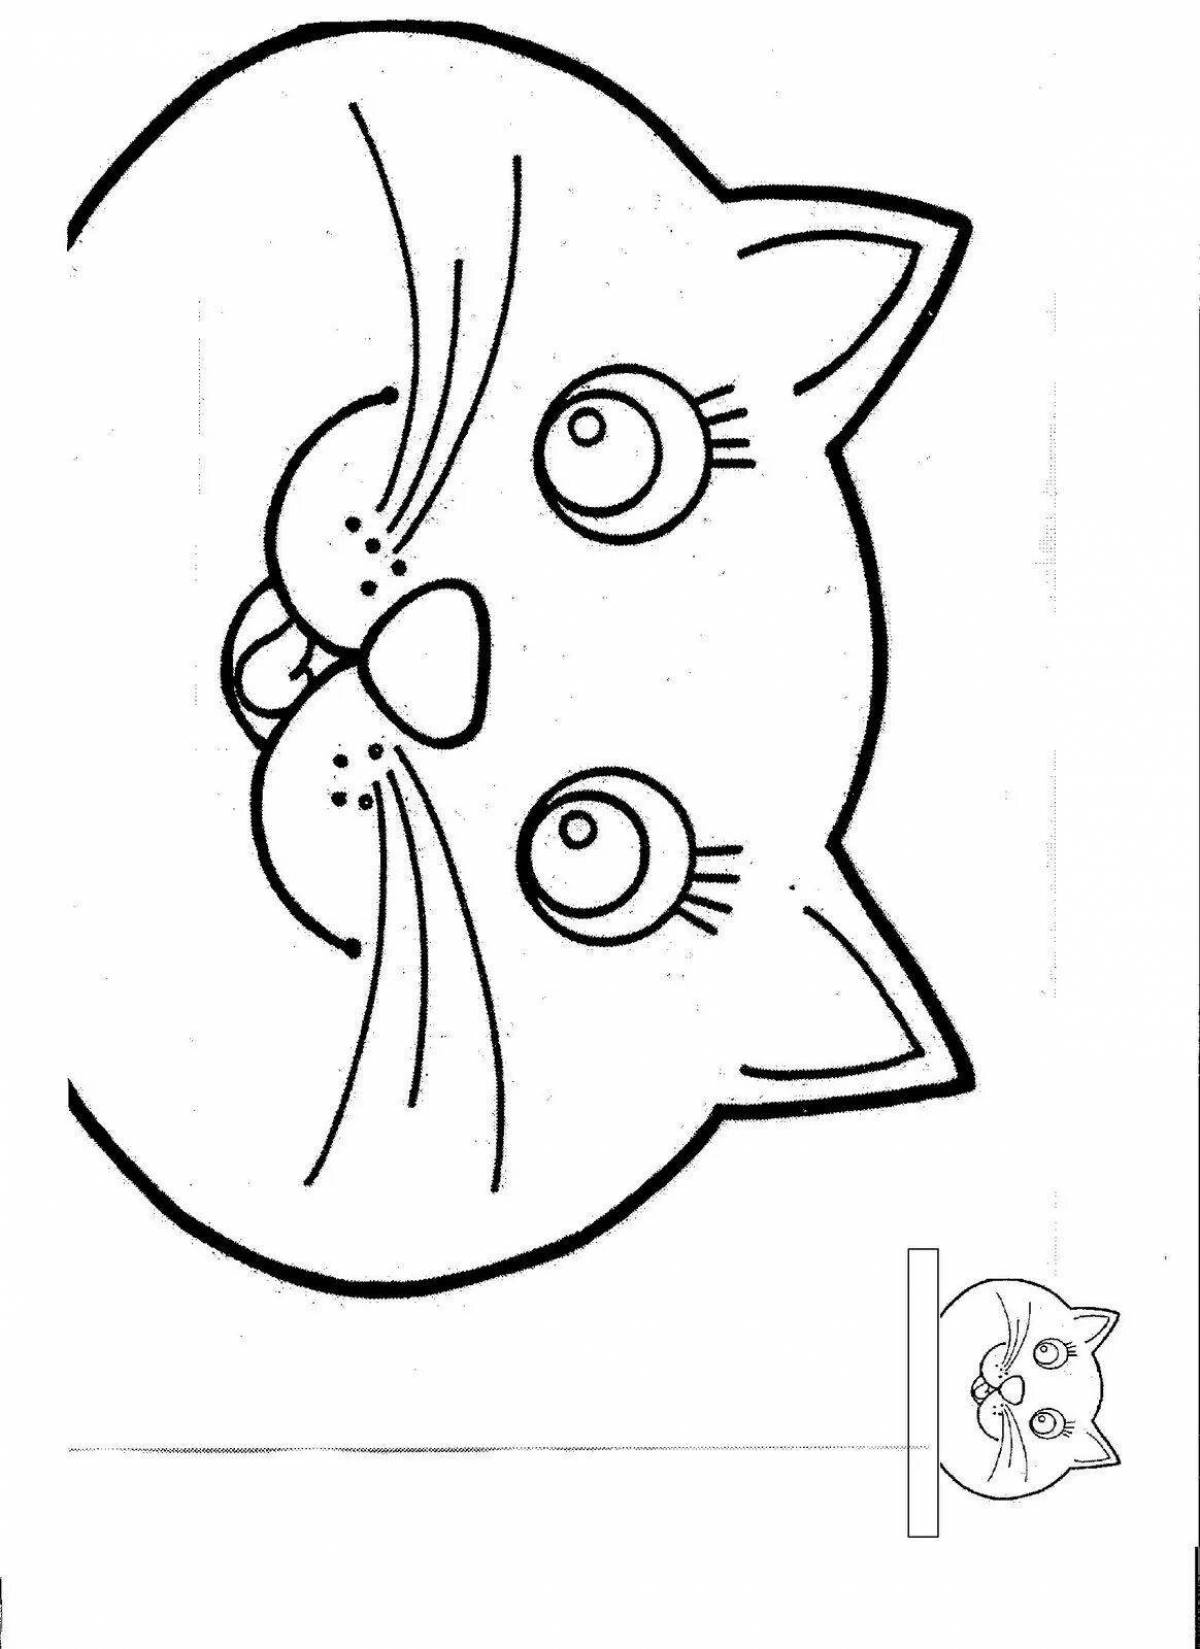 Coloring page wild cat face